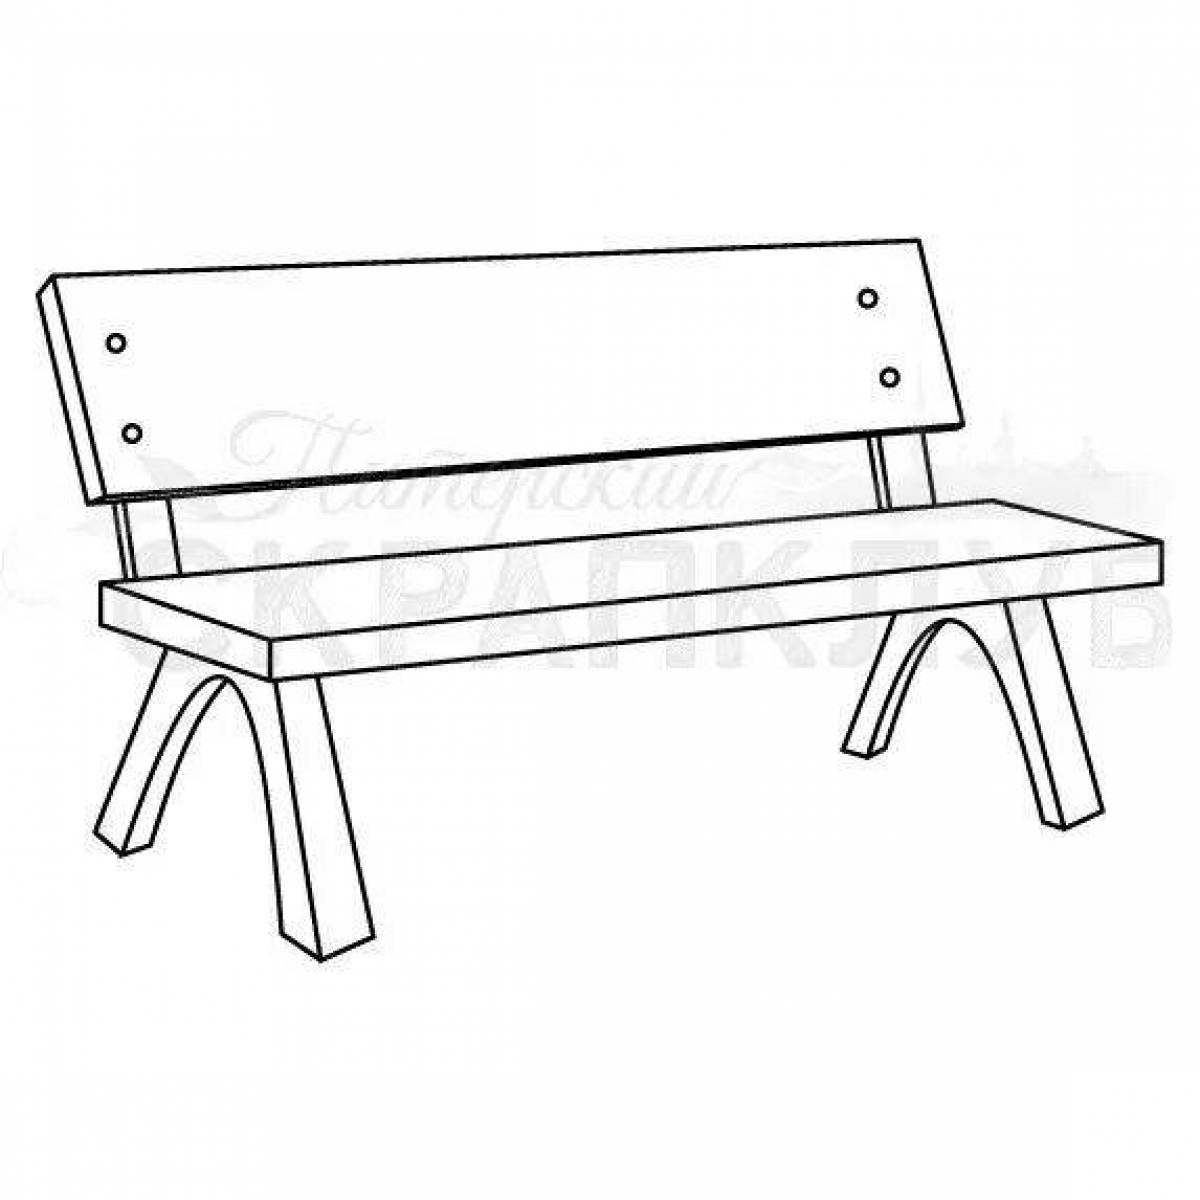 Festive bench coloring page